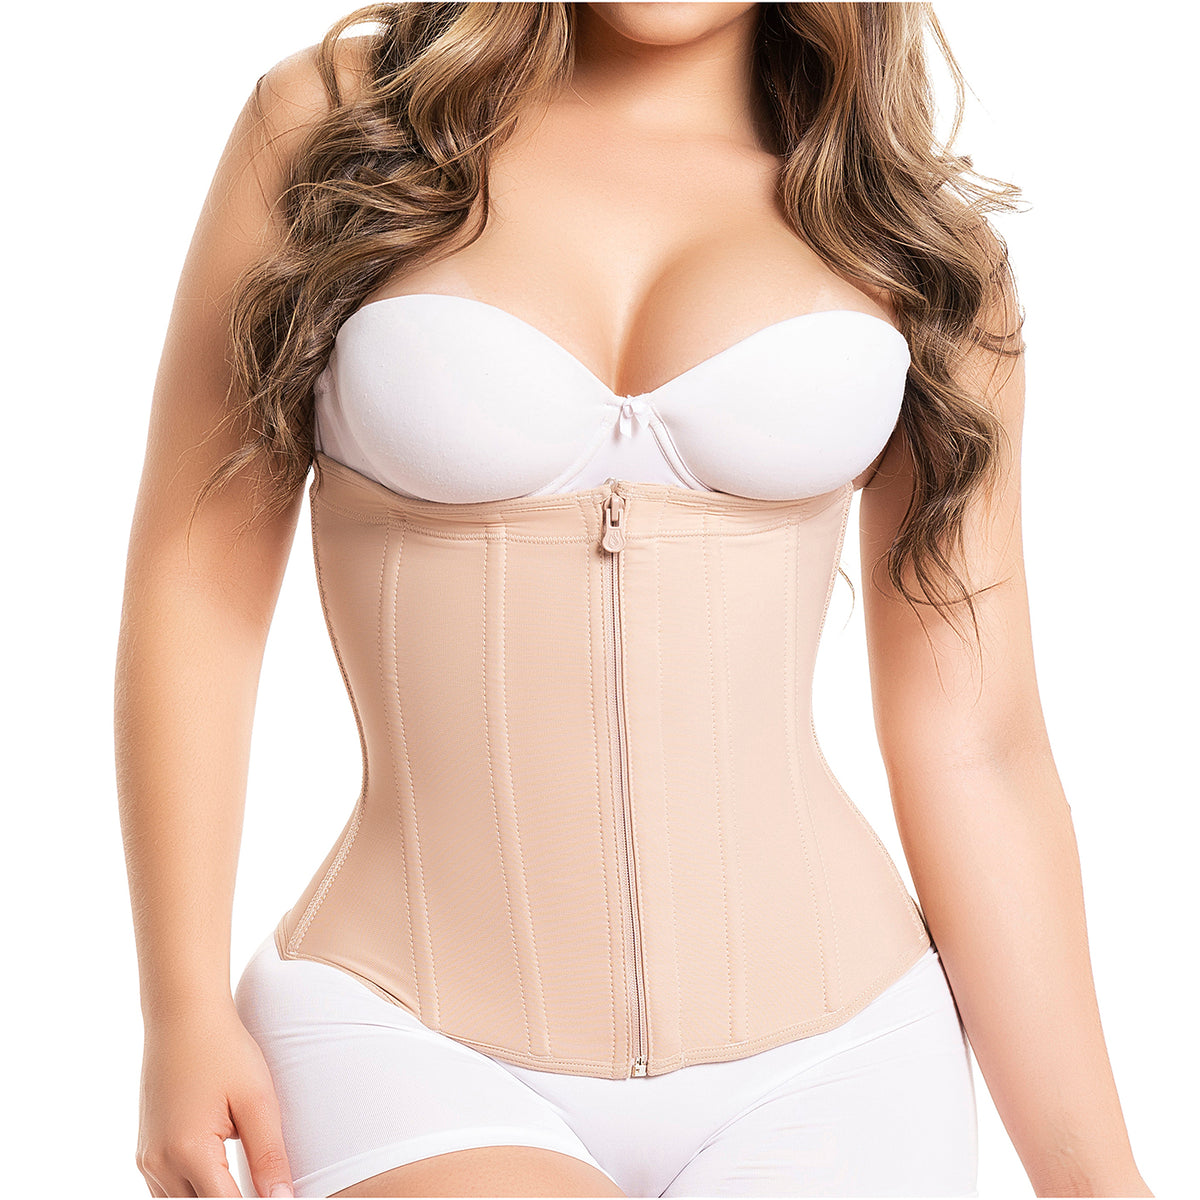 BODY SHAPER REVIEW from Diane & Geordi 2396 ❤️️ 